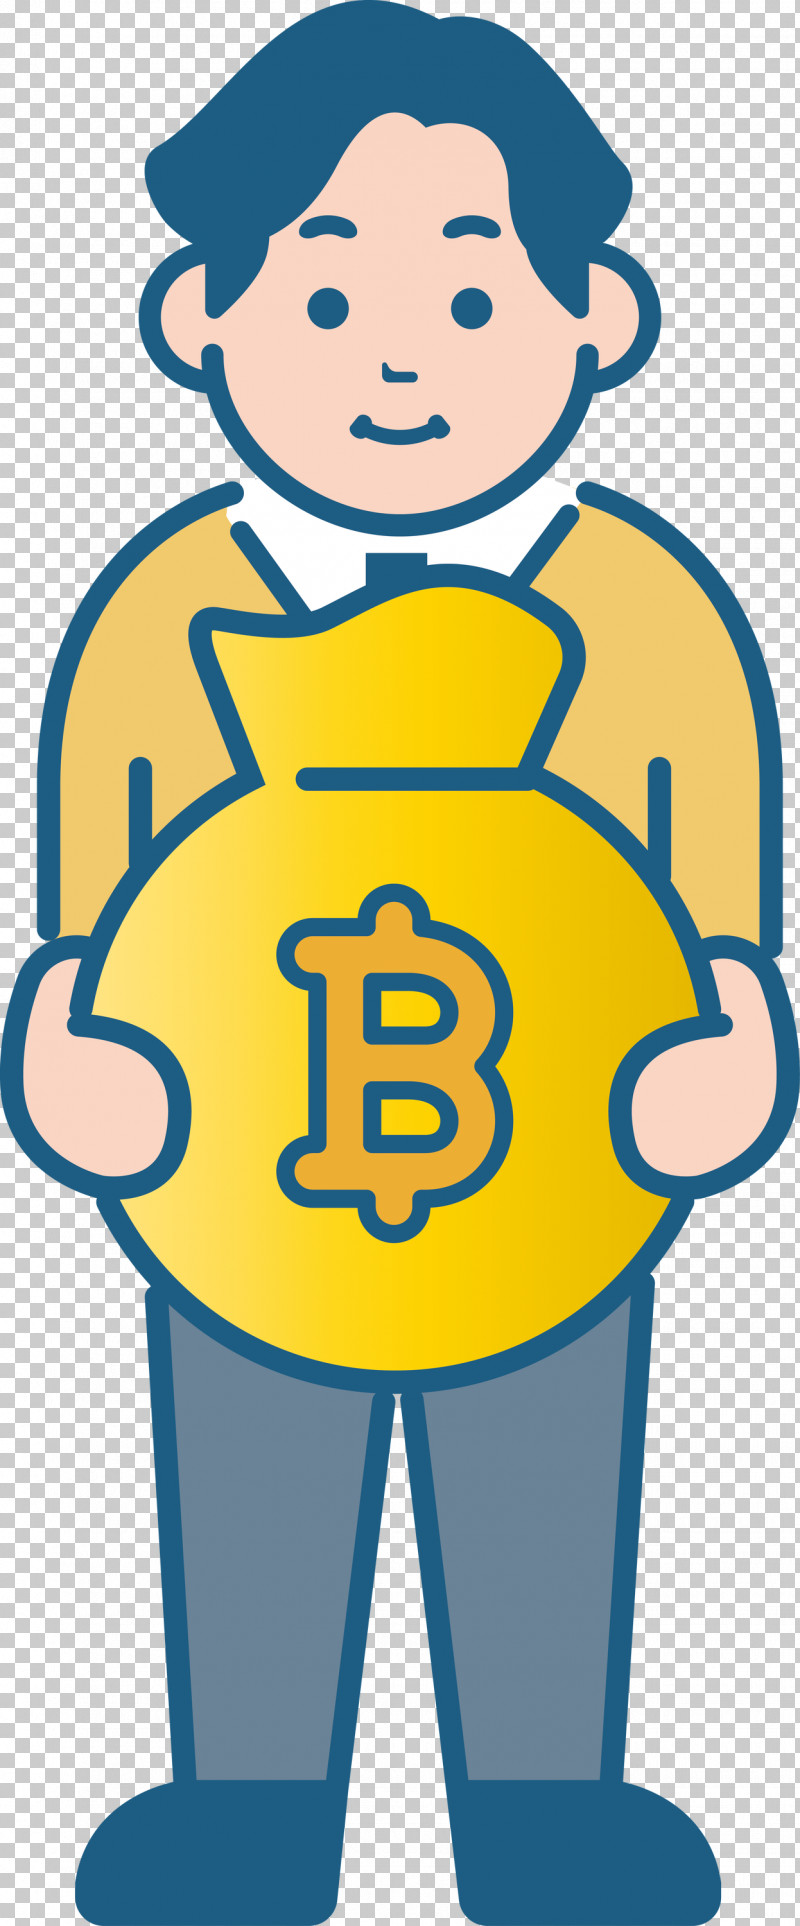 Bitcoin Virtual Currency PNG, Clipart, Asset, Bag, Bank, Banknote, Bitcoin Free PNG Download